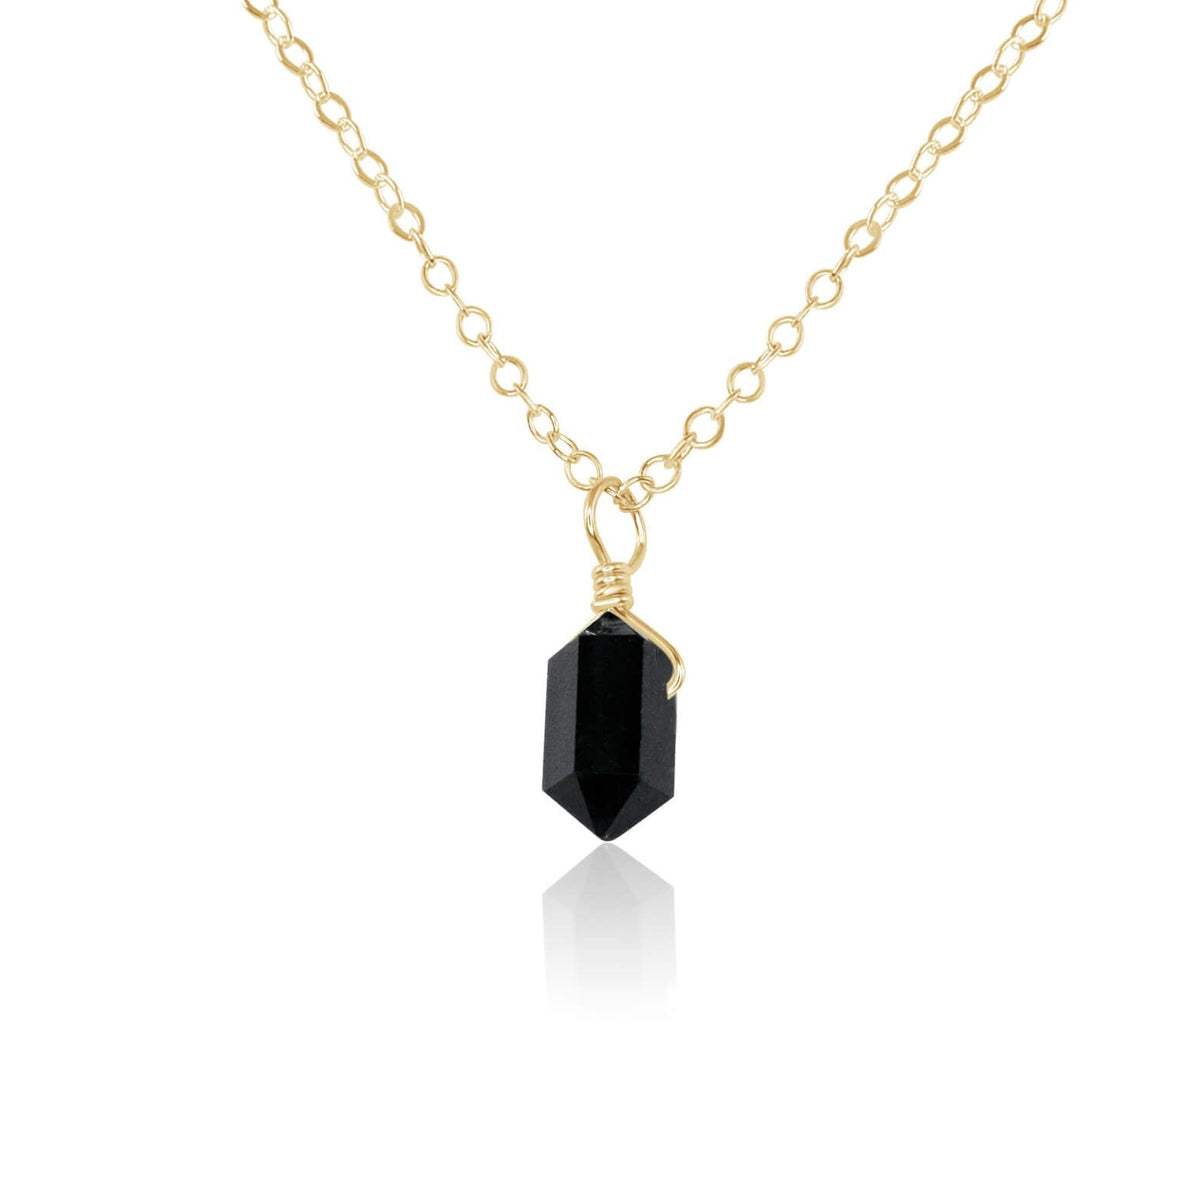 Double Terminated Crystal Pendant Necklace - 14K Gold Fill - Luna Tide Handmade Jewellery